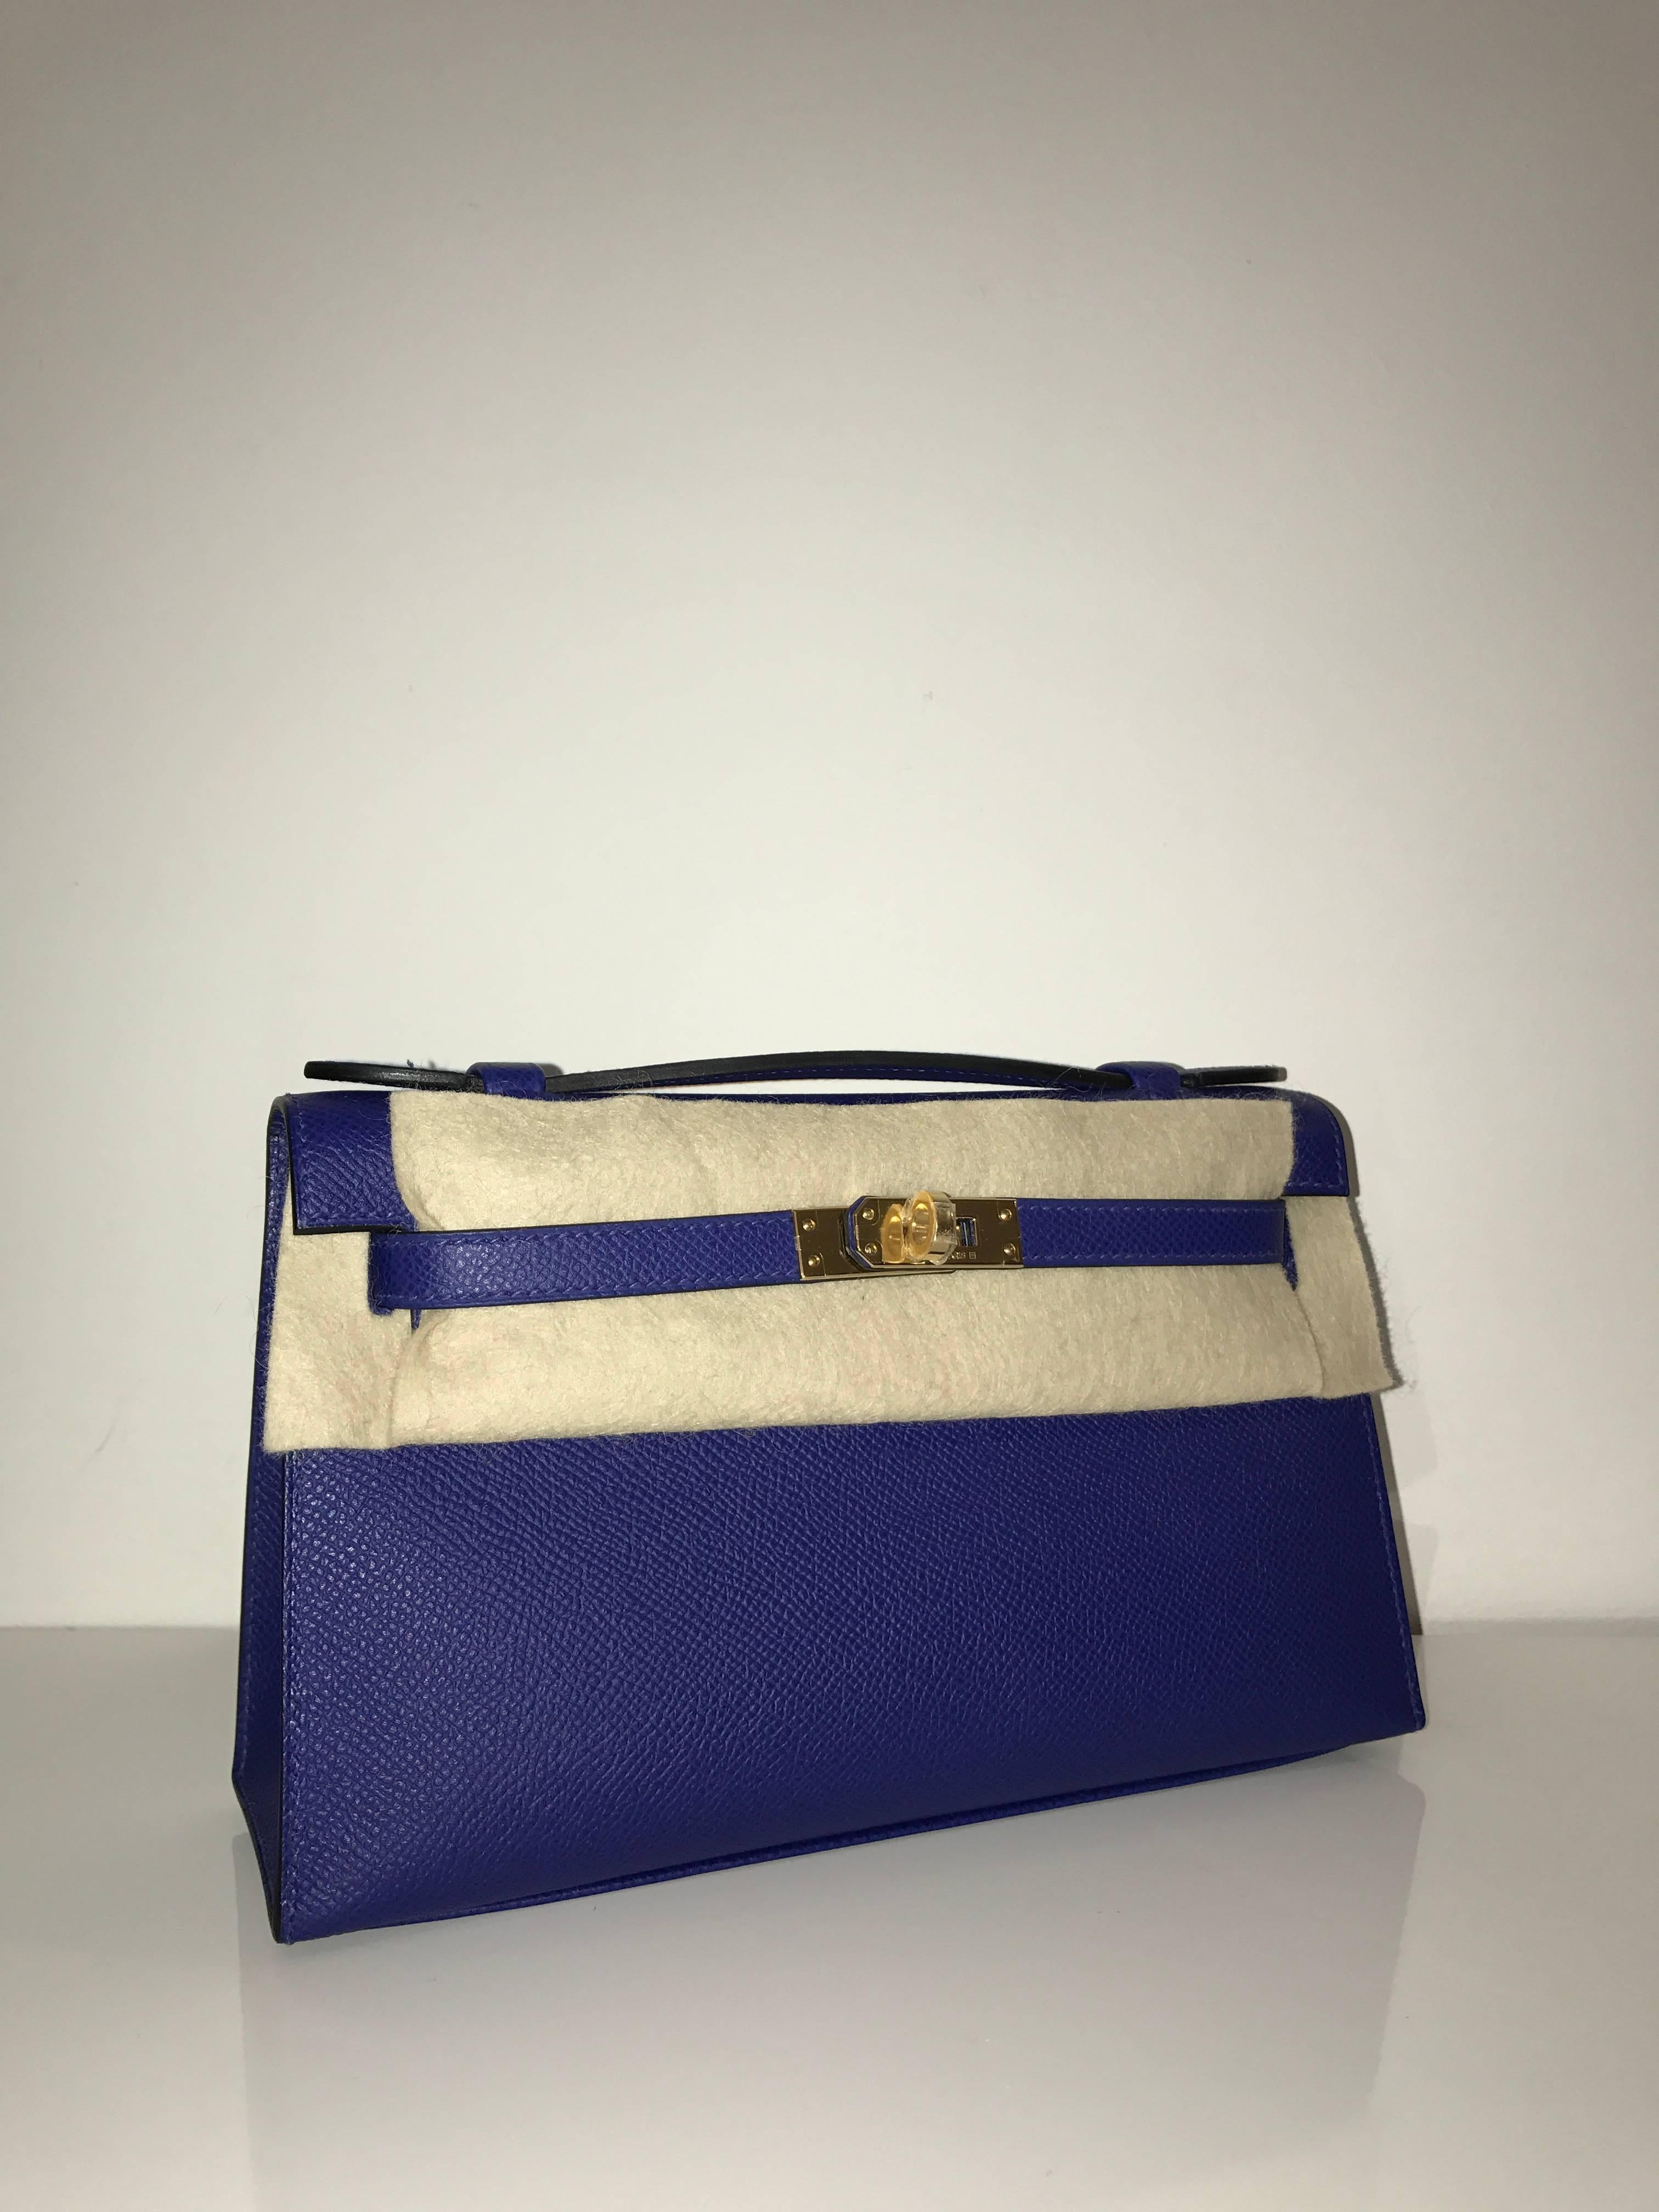 Hermes 
Kelly Pochette
Epsom Leather 
Colour Electric blue 
Gold Hardware
Store fresh, comes with receipt and full set (dust bag, box...) 
Hydeparkfashion specializes in sourcing and delivering authentic luxury handbags, mainly Hermes, to clients